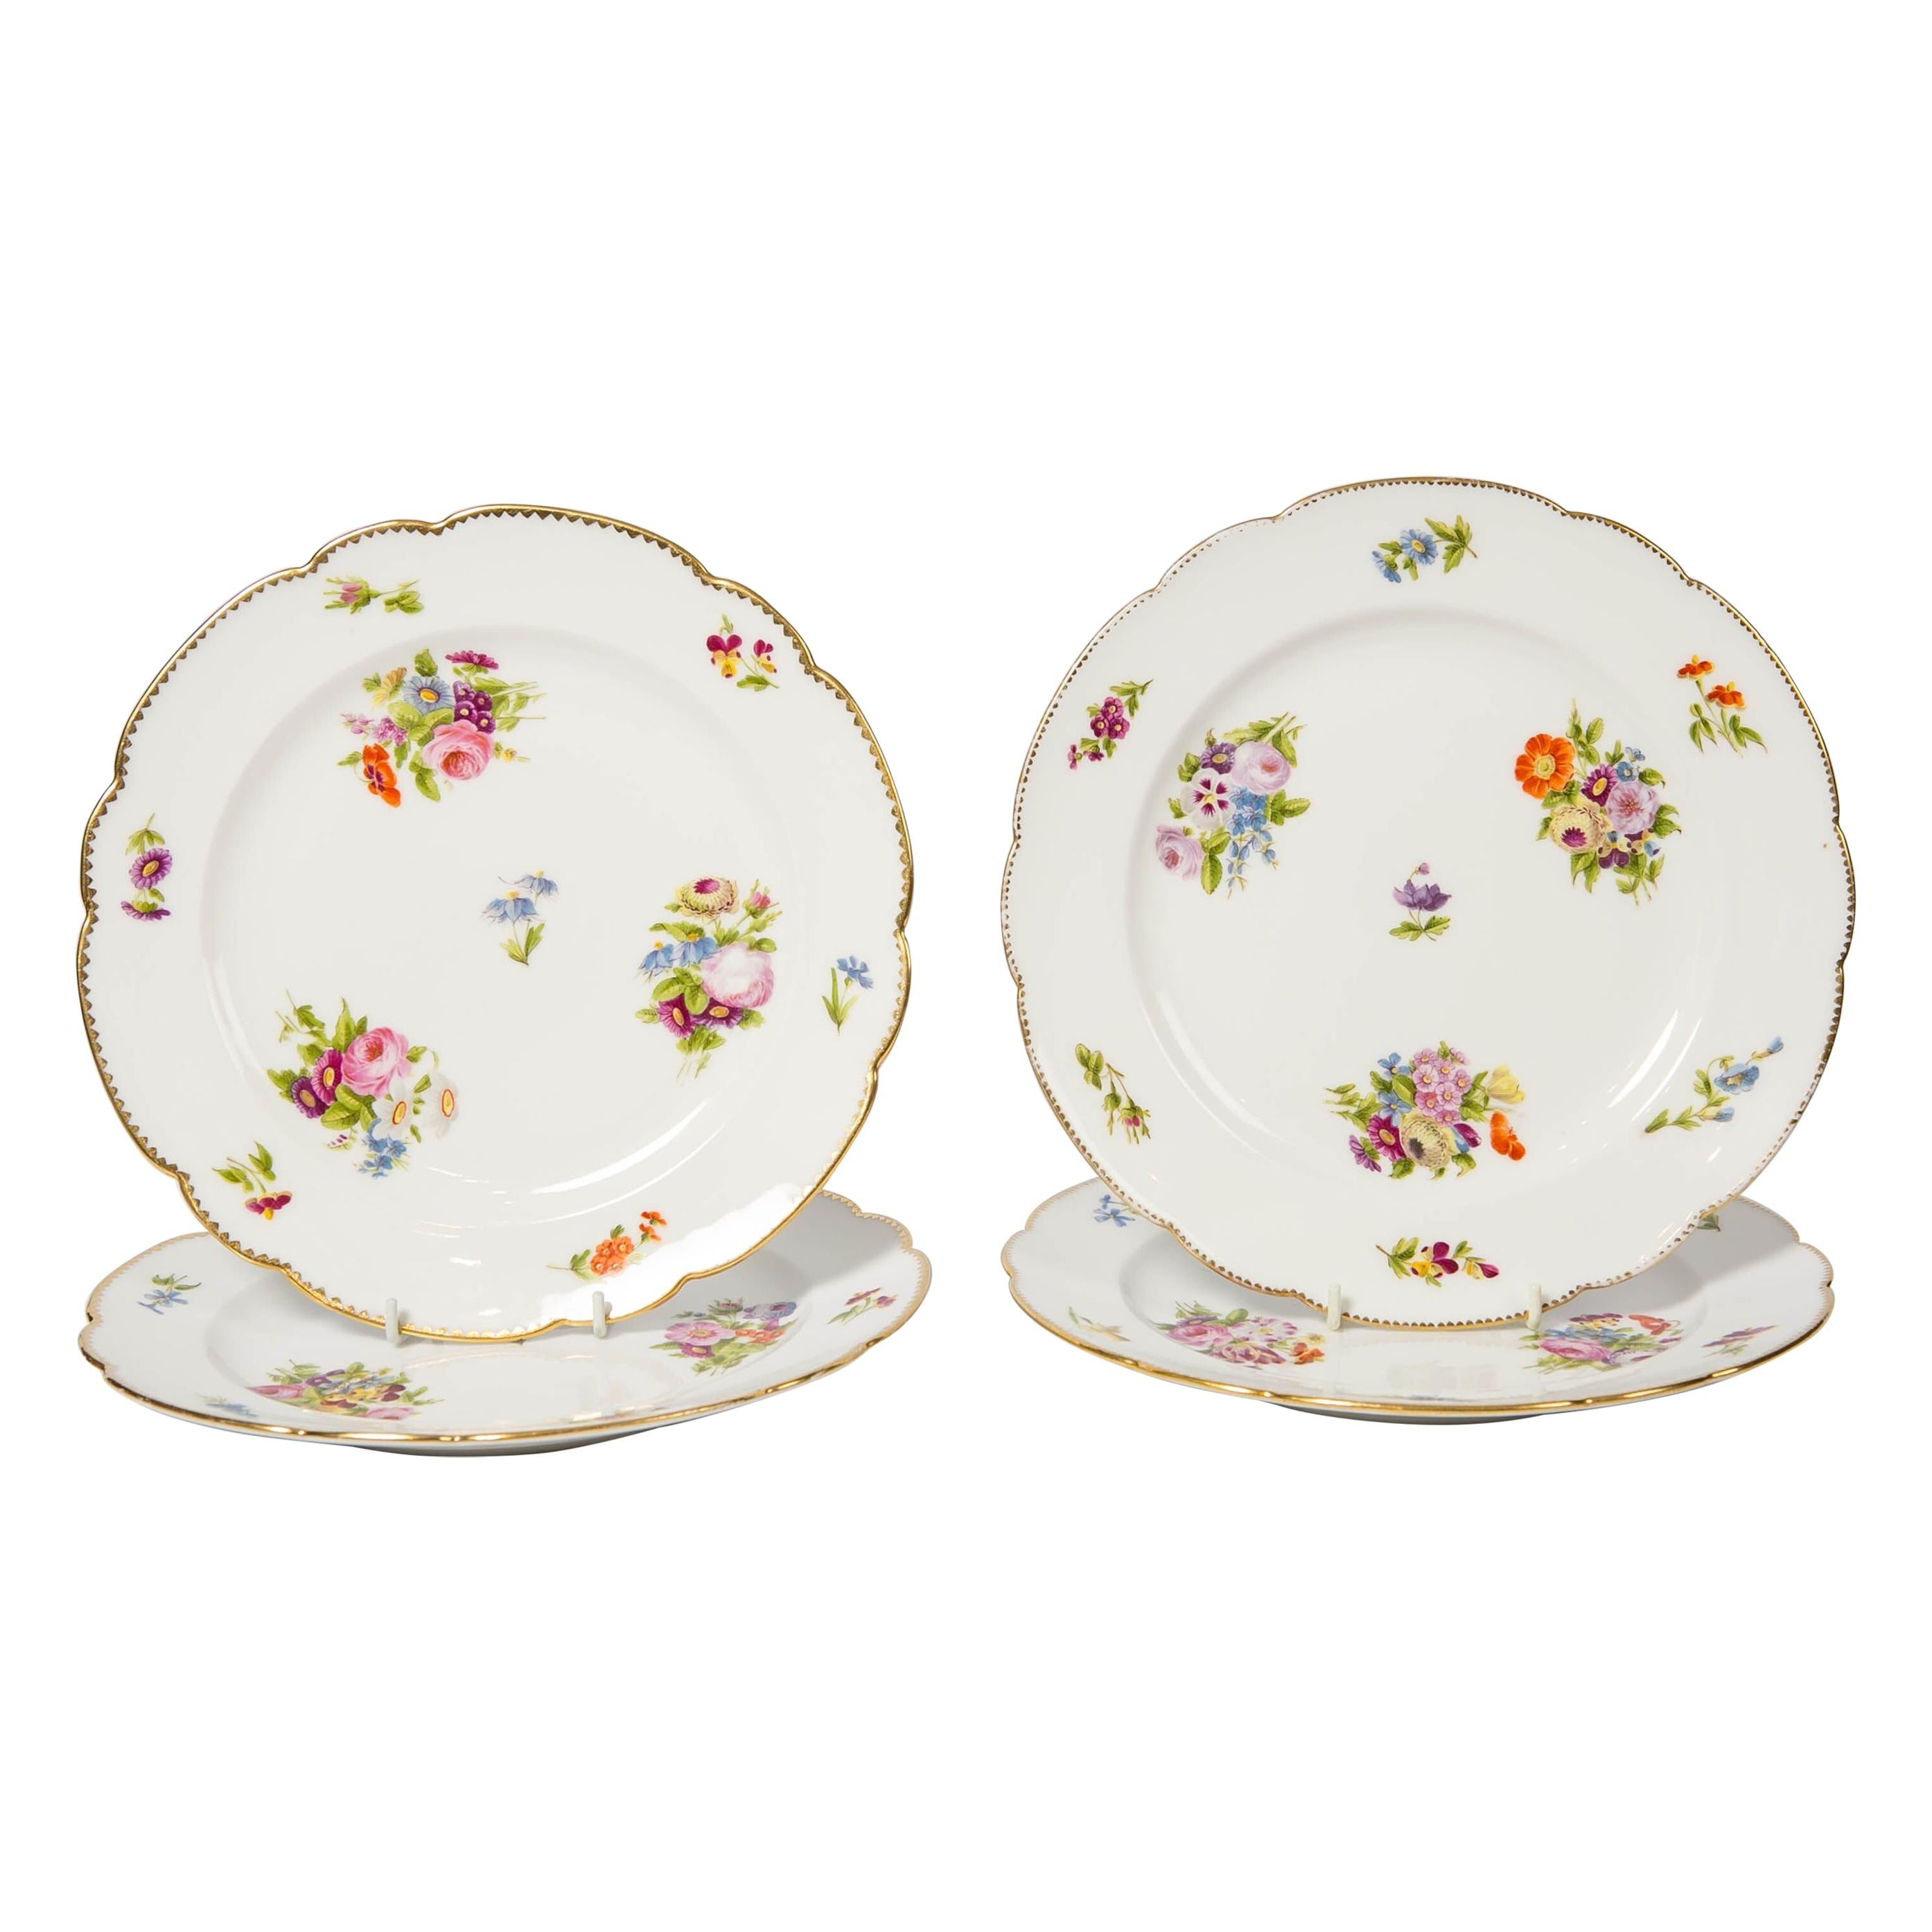 Four Feuillet Floral Dishes Made in France, circa 1850 at 1stDibs | dishes  made in france, porcelain dinnerware sets